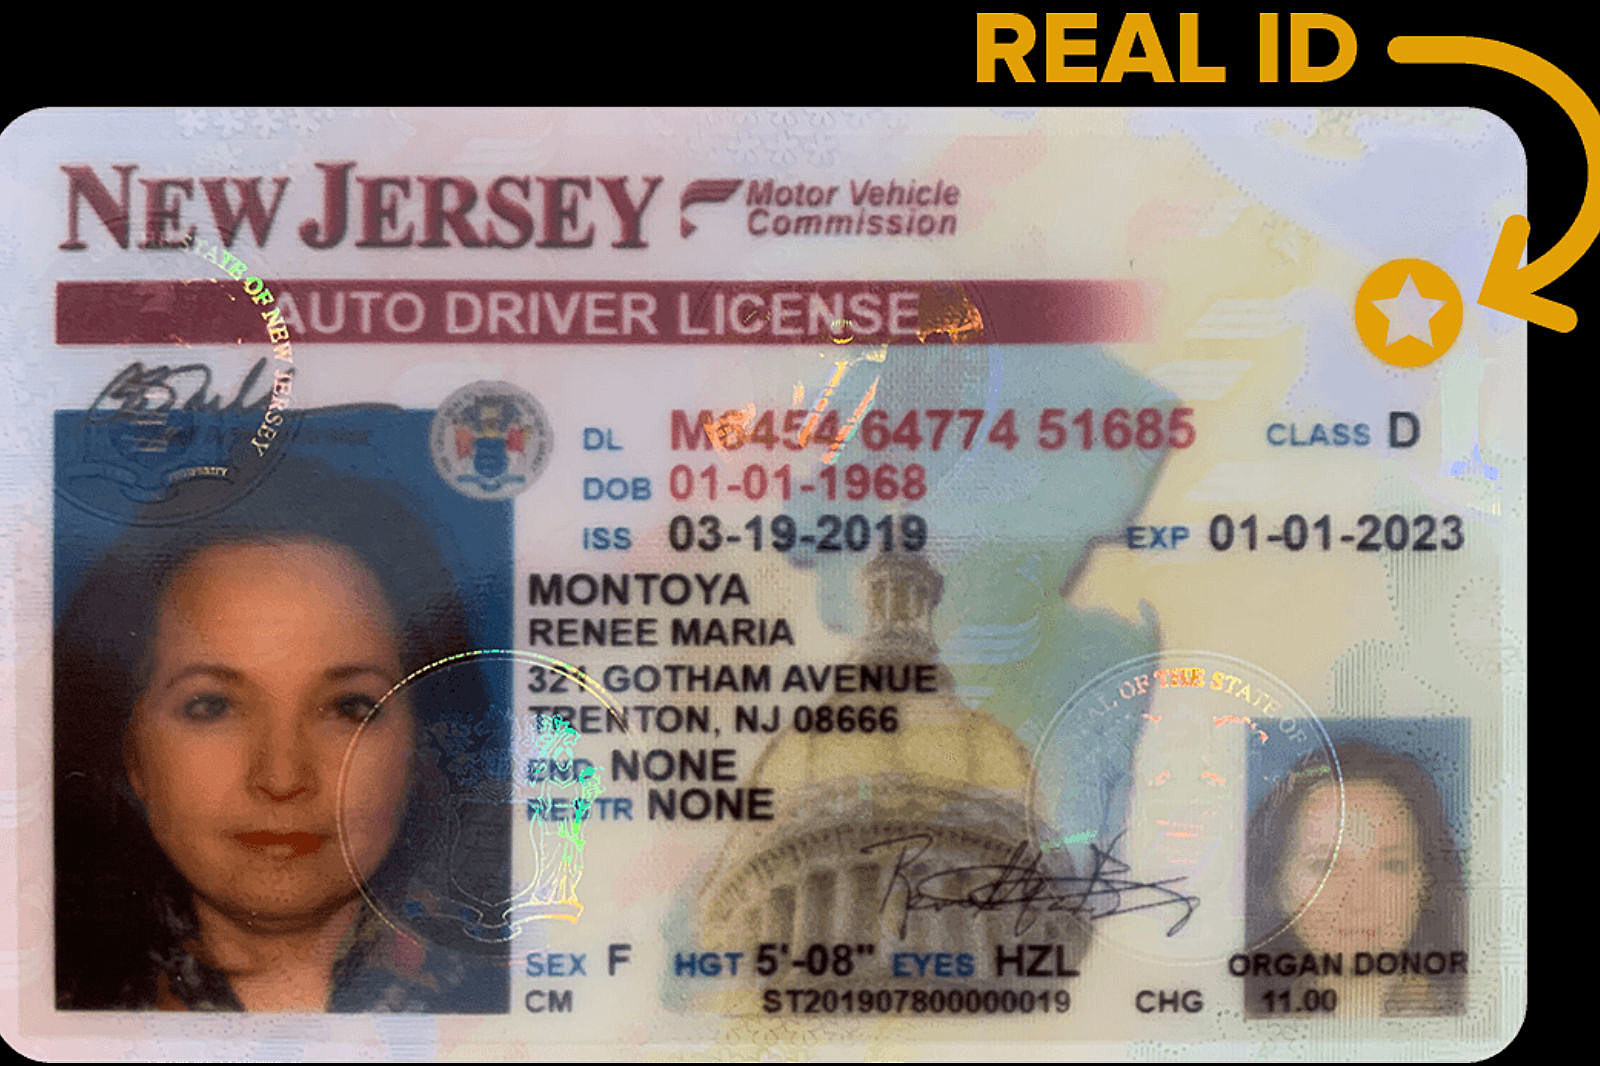 Real IDs not ready for NJ public yet amid testing, MVC chief says